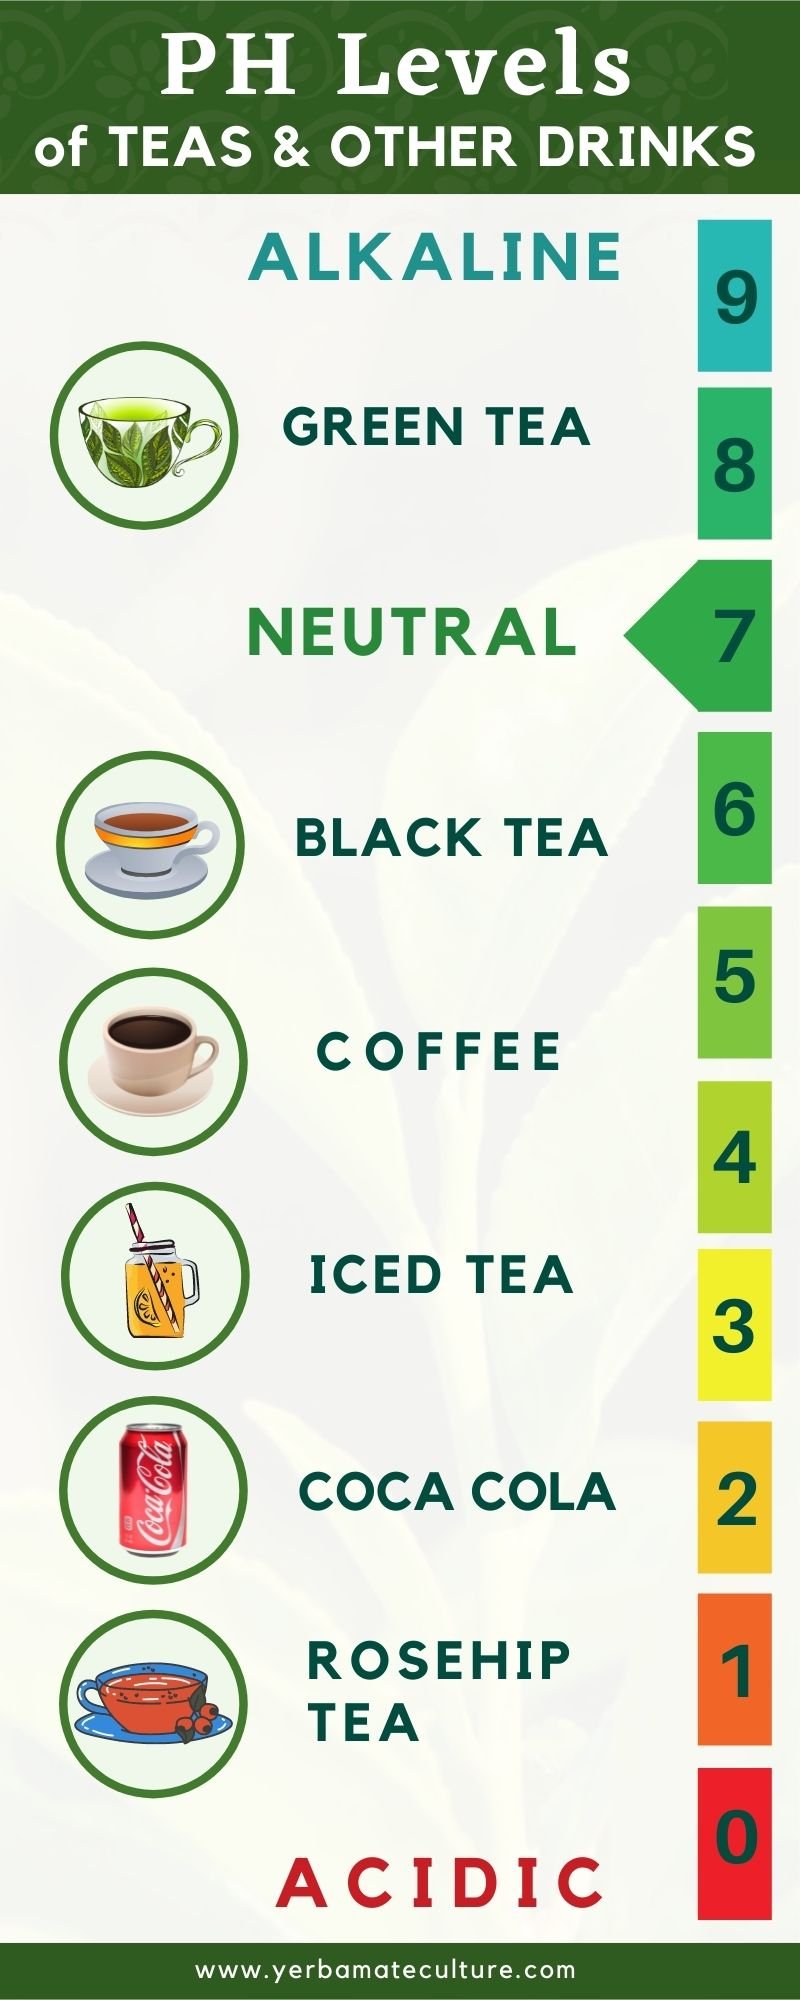 PH levels of teas and other drinks